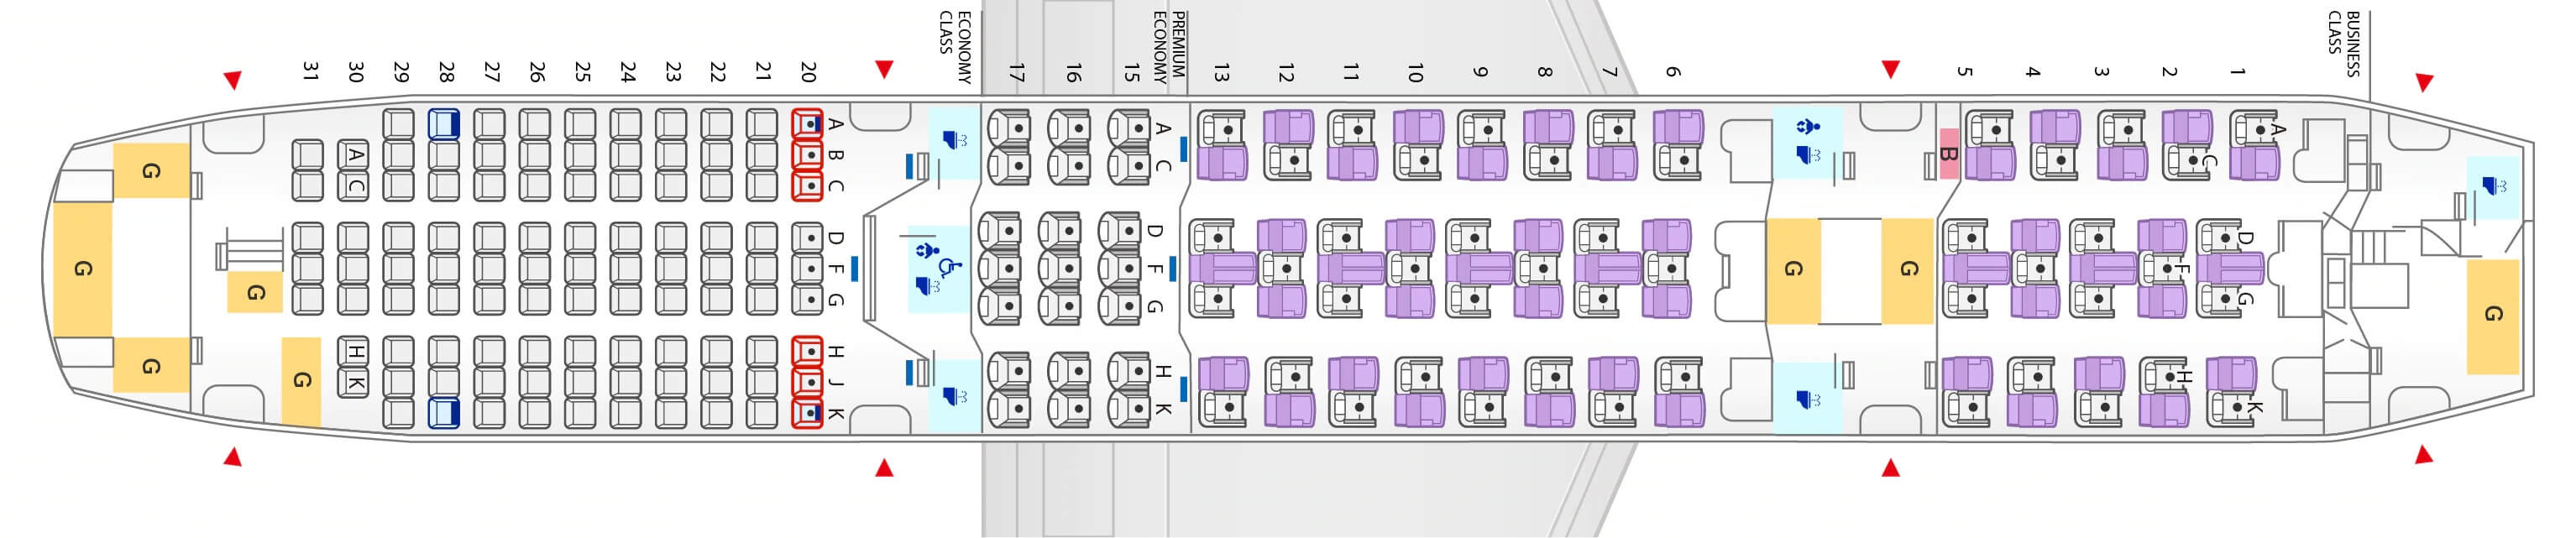 United Airlines Seating Chart 787 8 Awesome Home